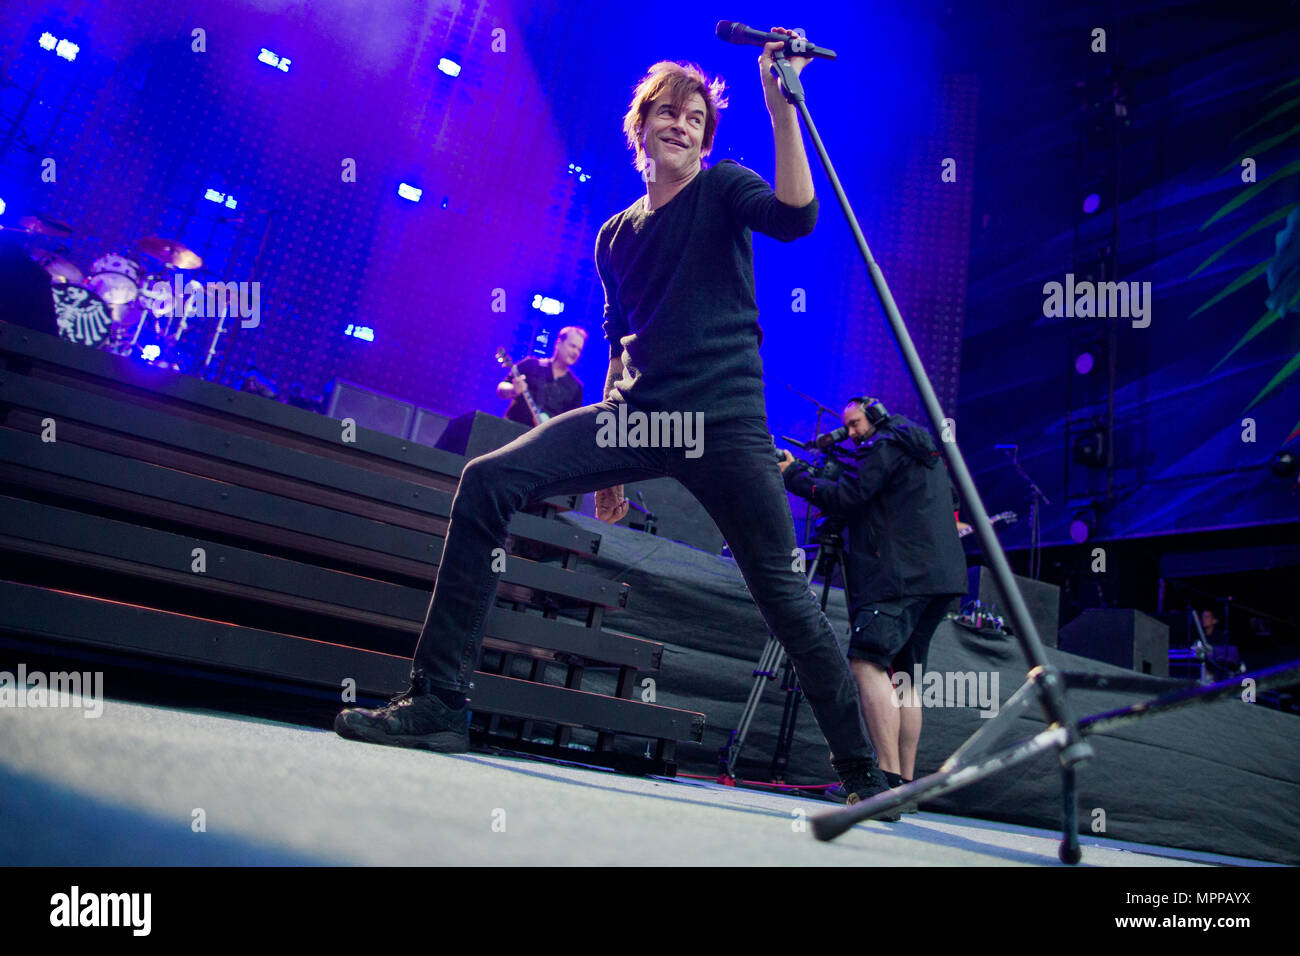 24 May 2018, Germany, Essen: Campino, singer with the band "Die Toten Hosen",  performing on stage. The concert is the first of the "Laune der Natour" tour,  which is set to run